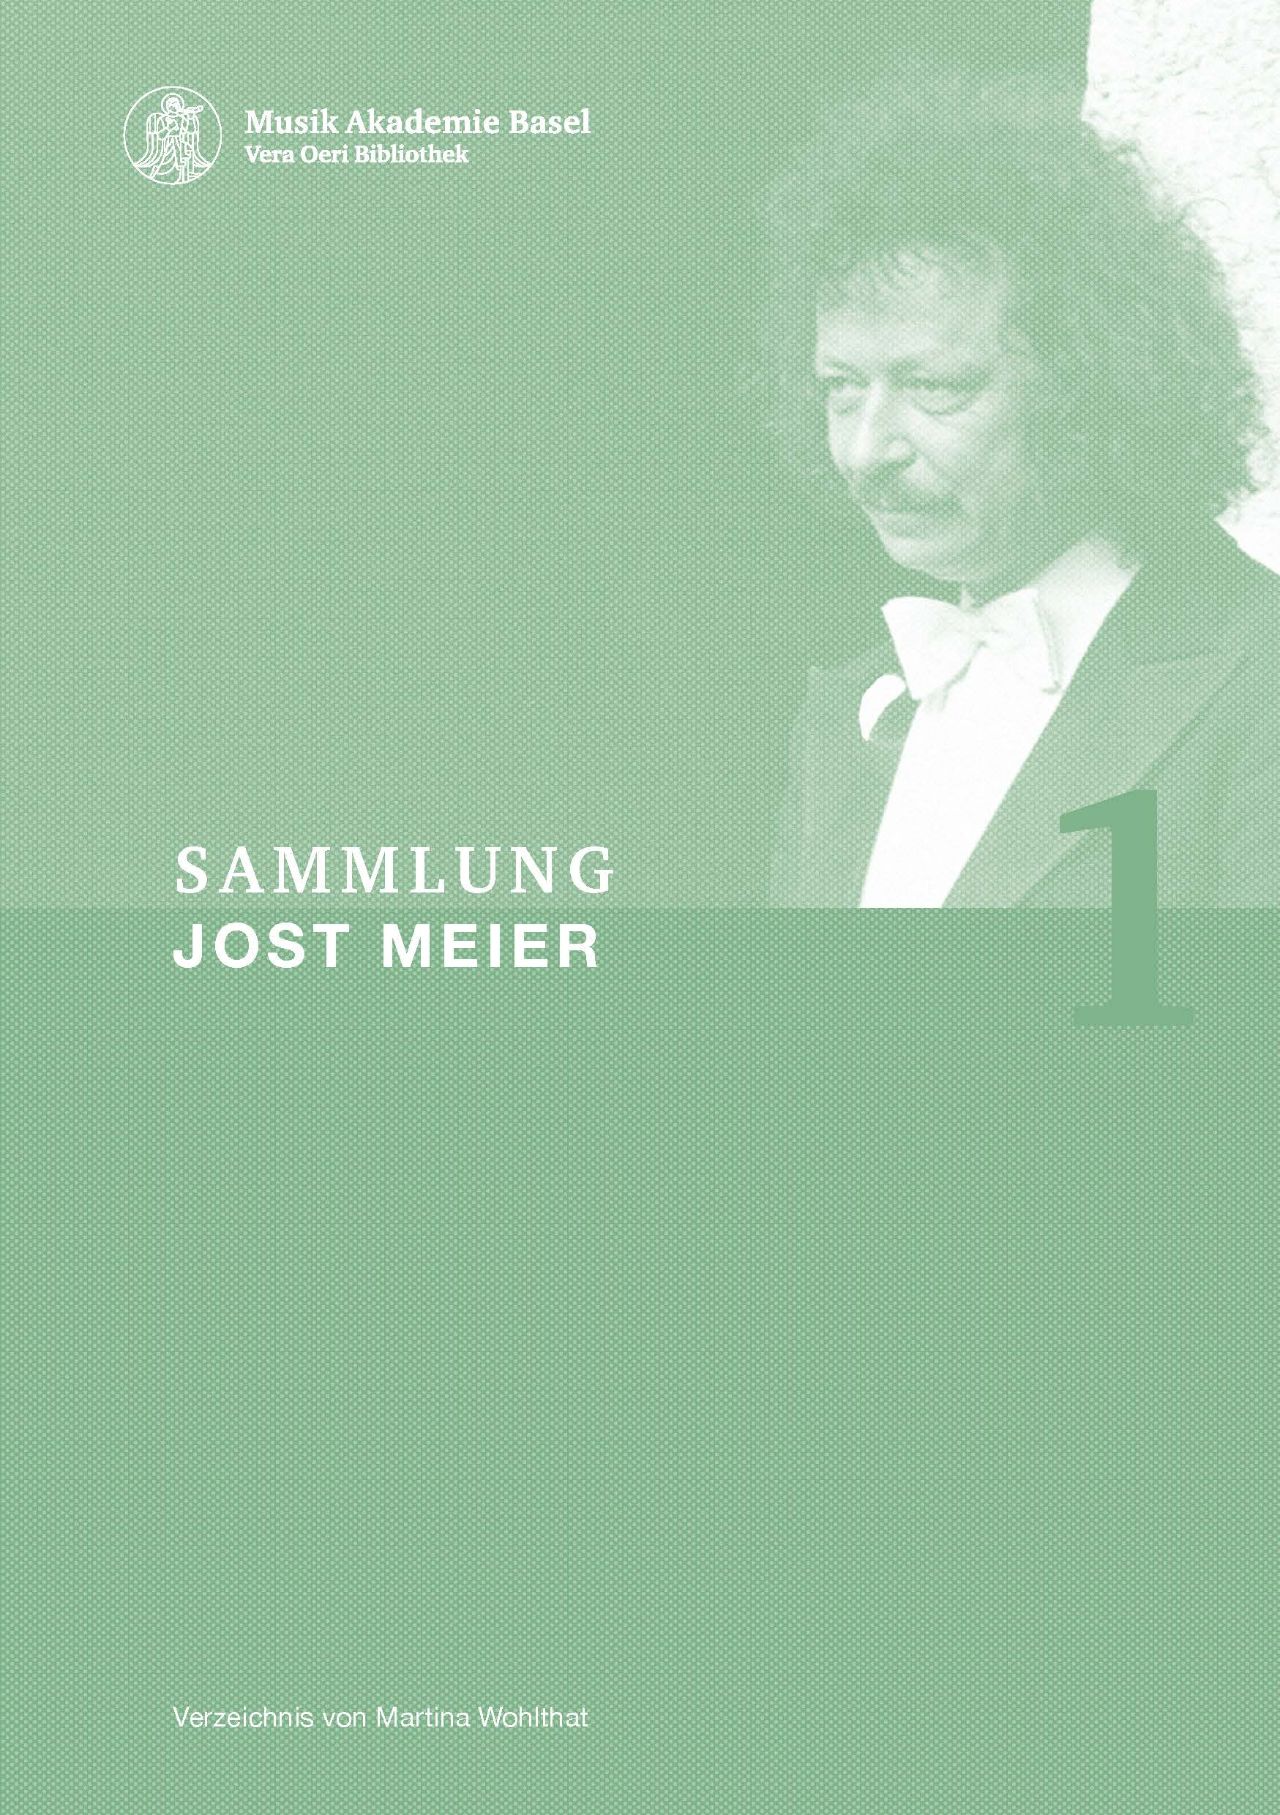 Cover of the Jost Meier Collection